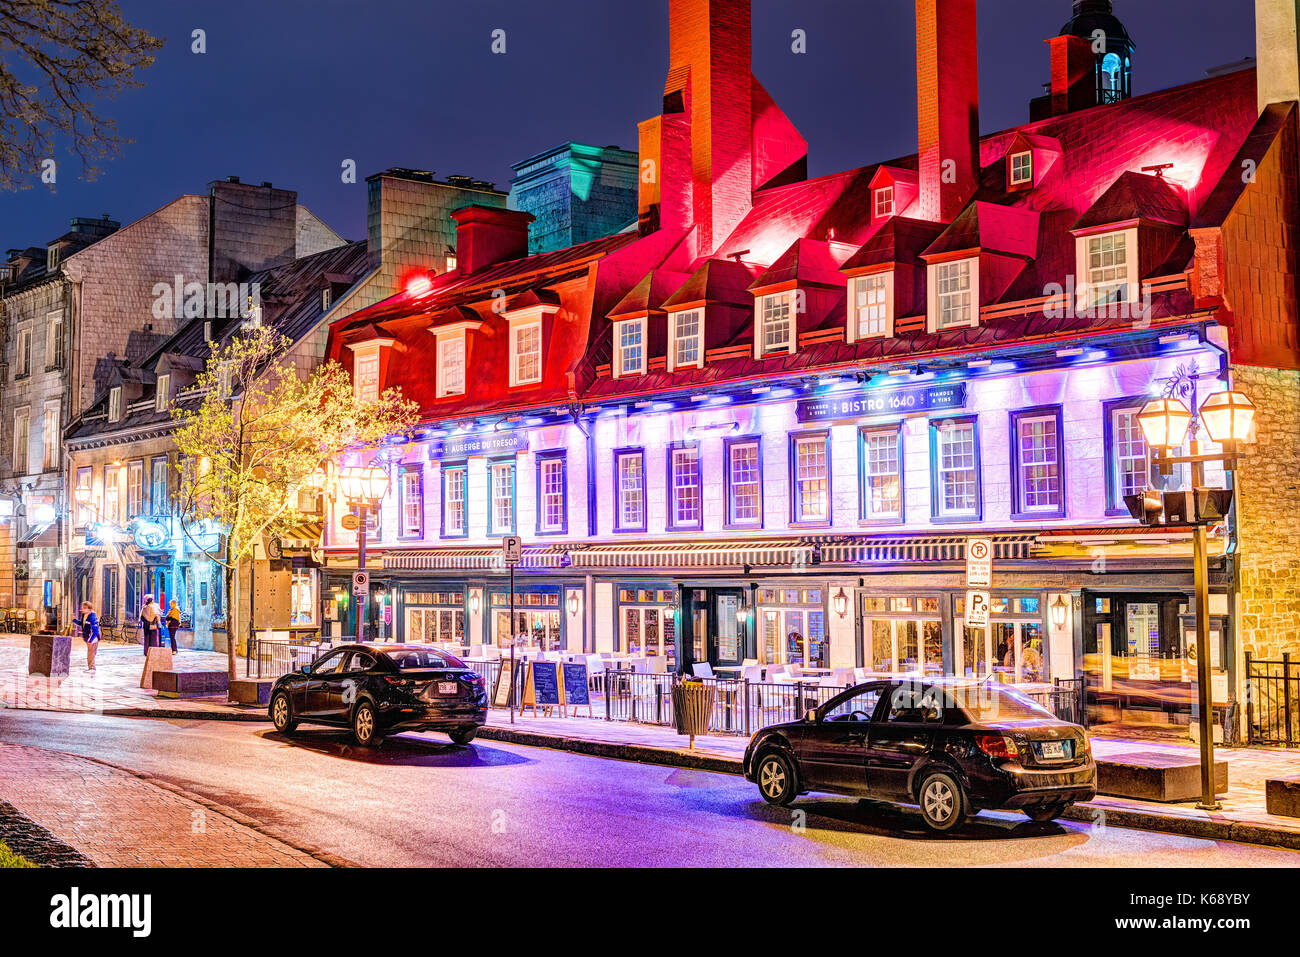 Quebec City, Canada - May 30, 2017: Old town Sainte Anne street with red colorful restaurant building by place D'arms park with people walking at nigh Stock Photo